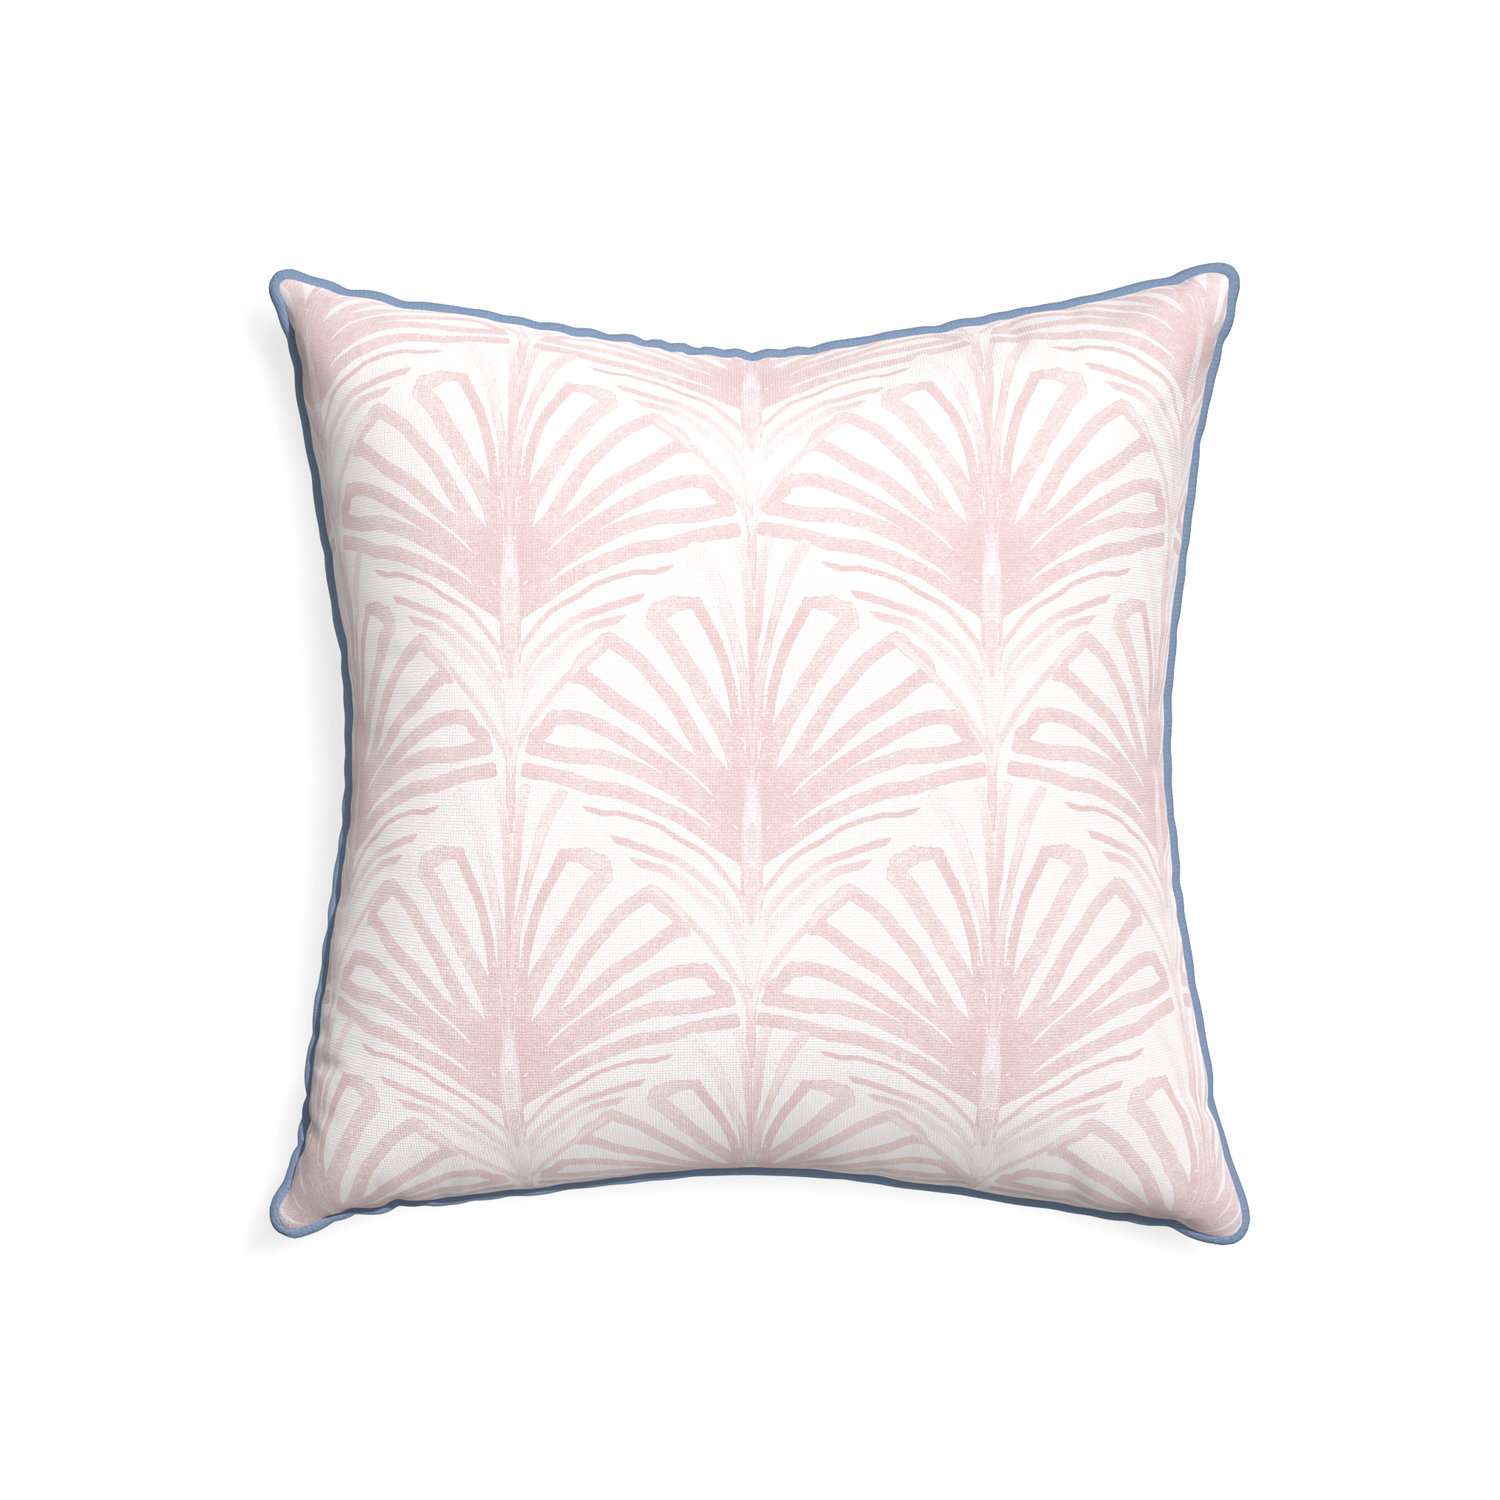 22-square suzy rose custom pillow with sky piping on white background